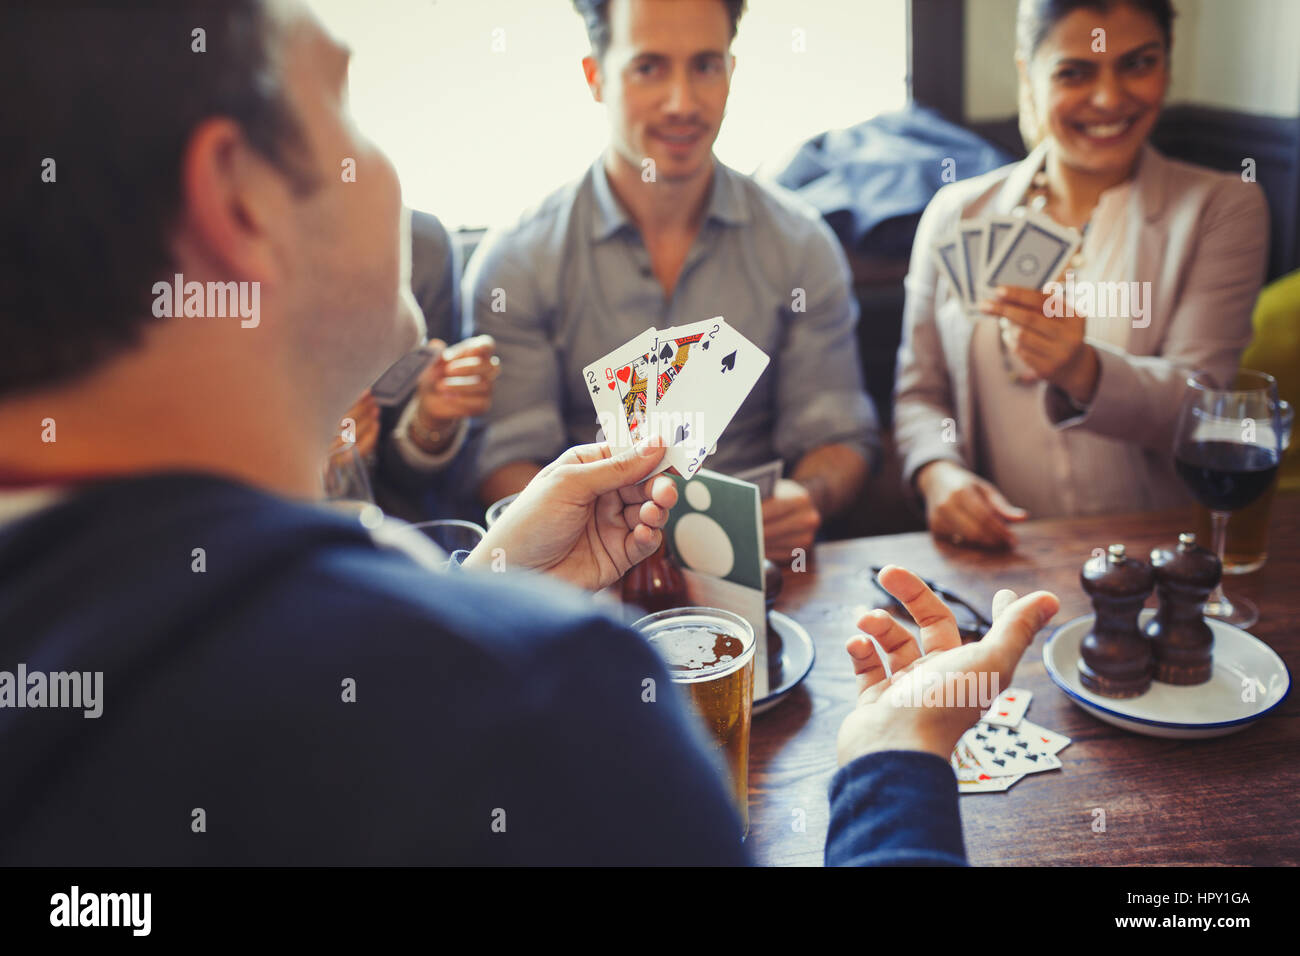 Friends playing poker and drinking beer and wine at table in bar Stock Photo